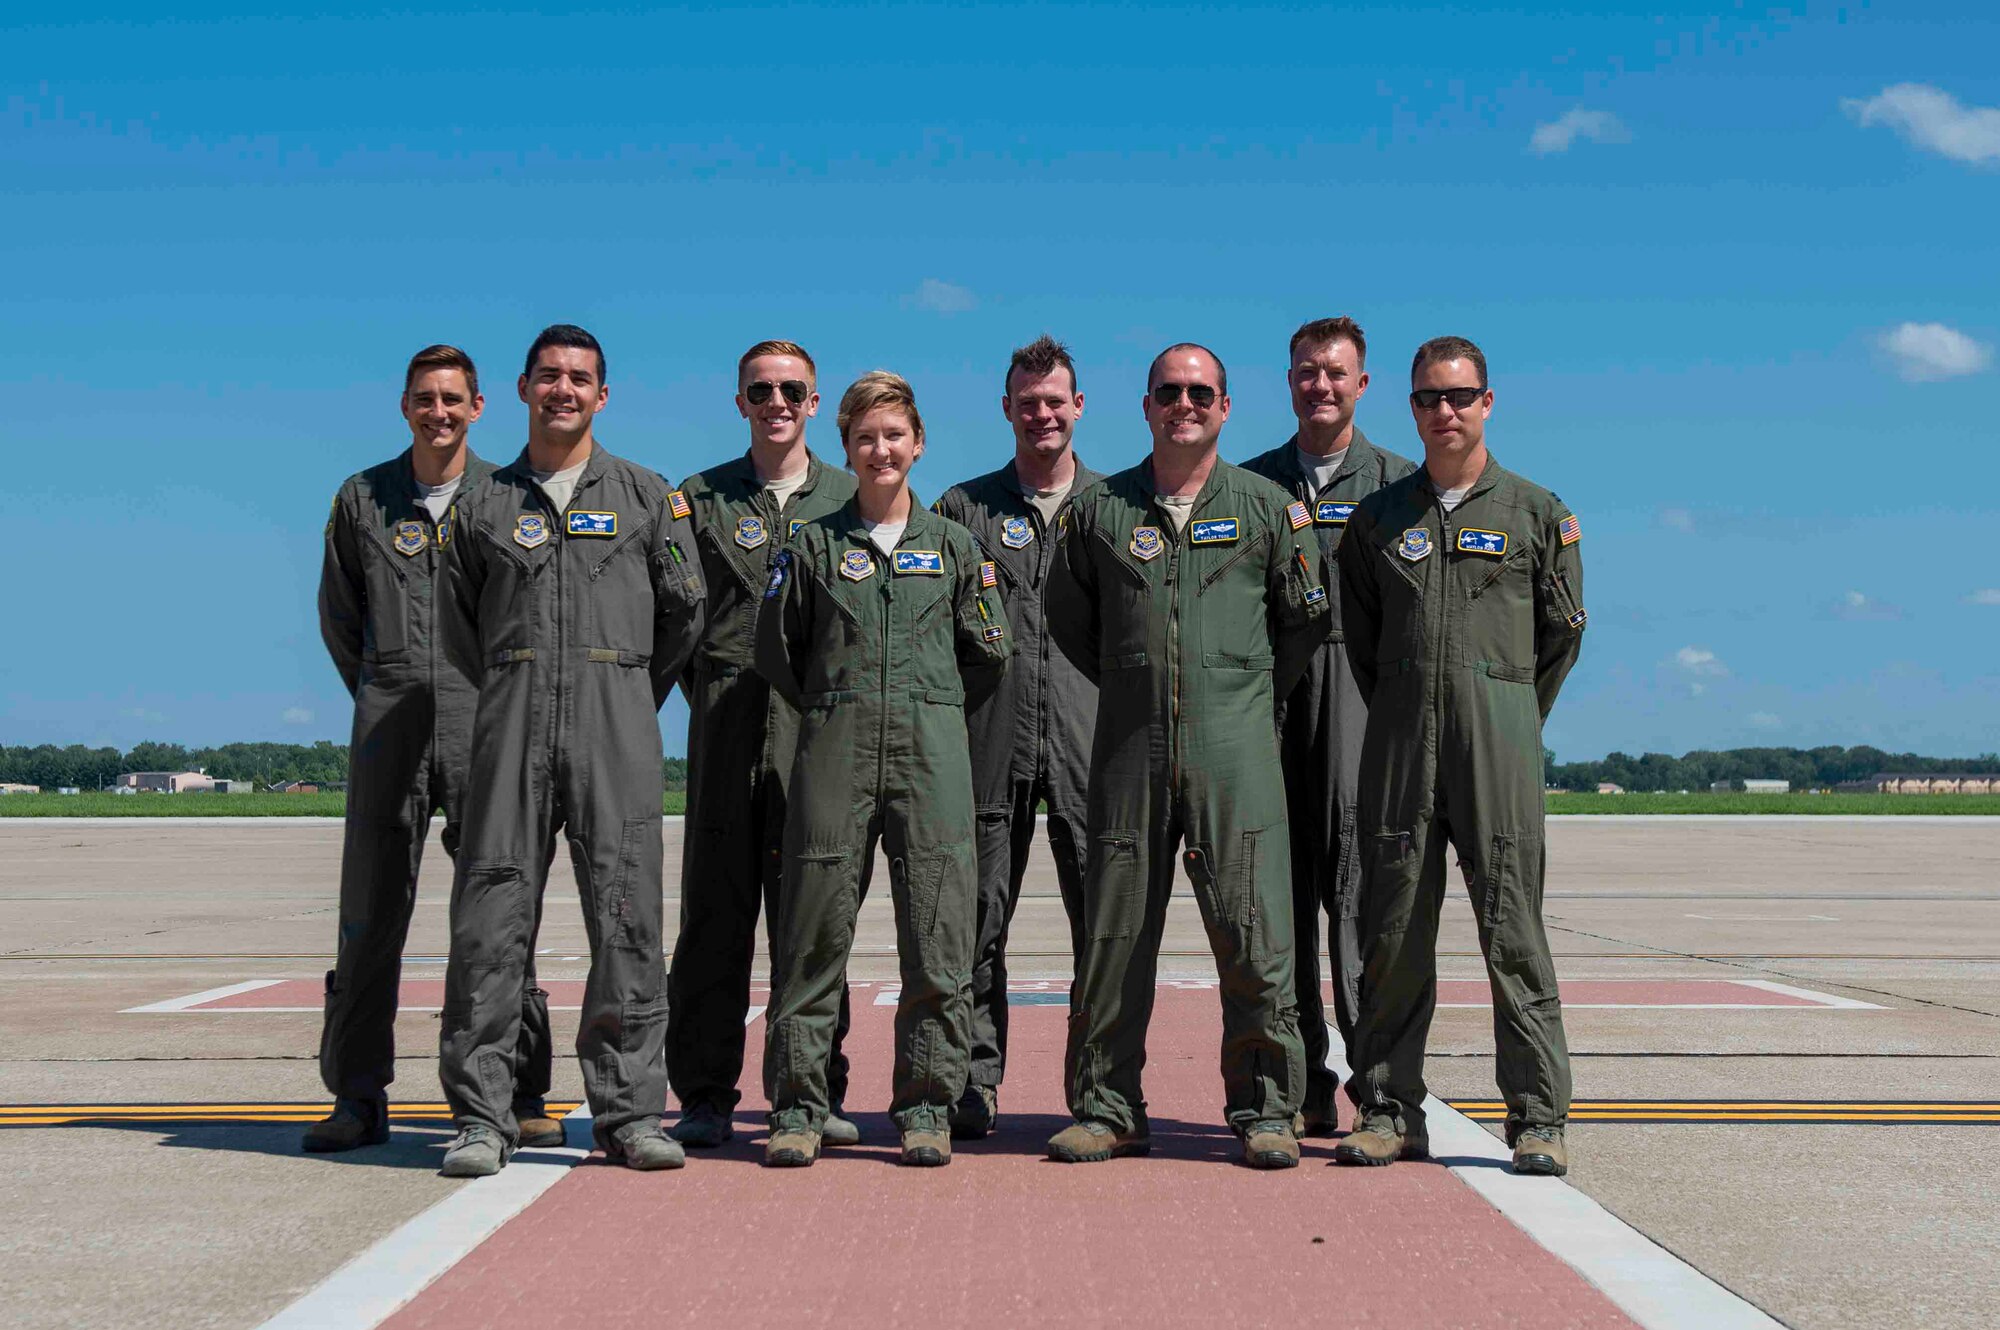 Eight C-21A pilots with the 375th Operations Group, including Lt. Col. Thomas Knaust, Maj. Taylor Todd, and Capts. Angus MacDonald, Alex Beveridge, Ramiro Rios, Jennifer Nolta, Mathew Williams and Waylon Mays, are this week’s Showcase Airmen. In the absence of Command Test Pilots, these pilots flew the first C-21A in the Avionics Upgrade Program. They spent days taking lessons with the avionics manufacturer and a Federal Aviation Association test pilot before they stepped foot in the airplane. This flight was key to building the training program for 100 pilots in the Air Force C-21A fleet.